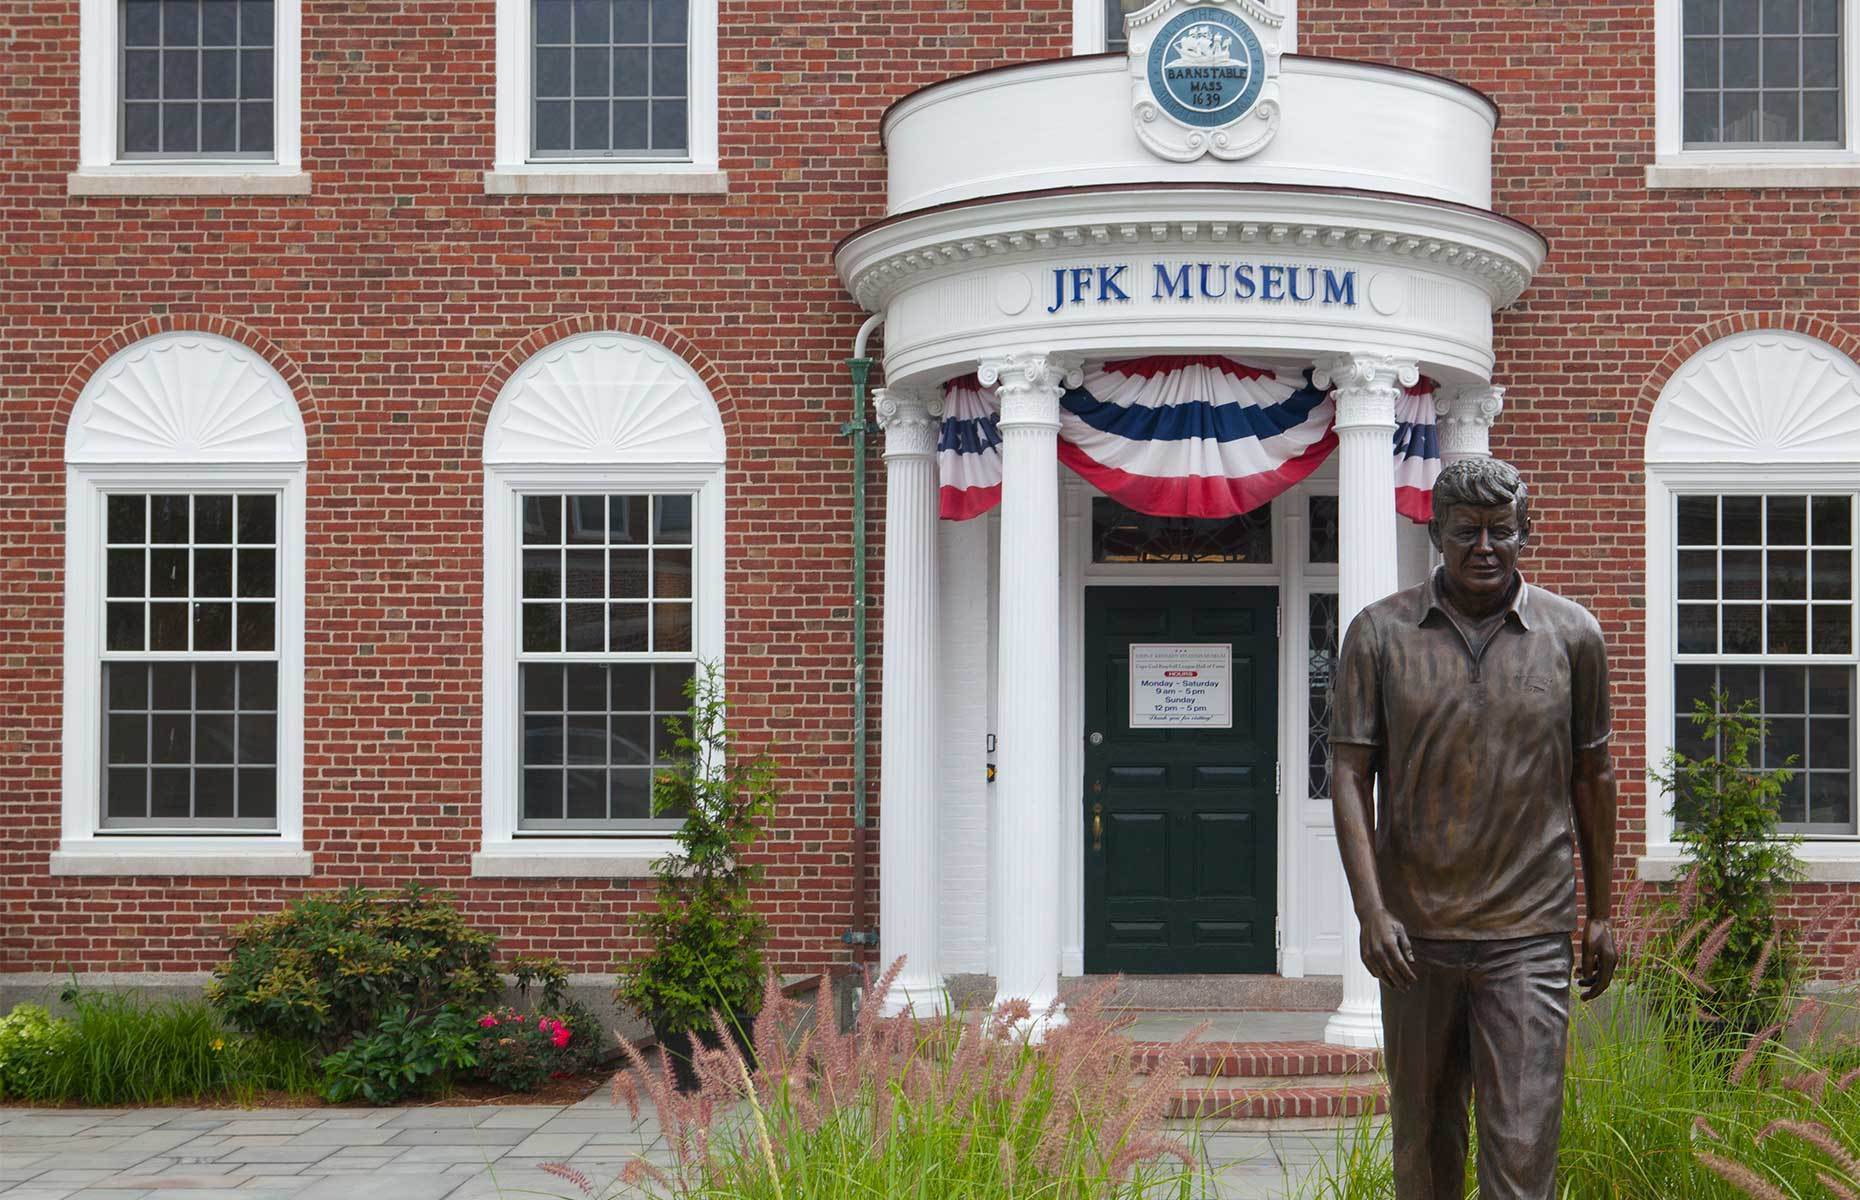 <p class="p1"><span>Cape Cod’s Hyannis has strong ties to the <a href="https://jfkhyannismuseum.org/" rel="noreferrer noopener"><span>famous Kennedy family</span></a>. In fact, Hyannis is home to an engaging museum dedicated to telling the Kennedy story through the lens of US history.</span></p>